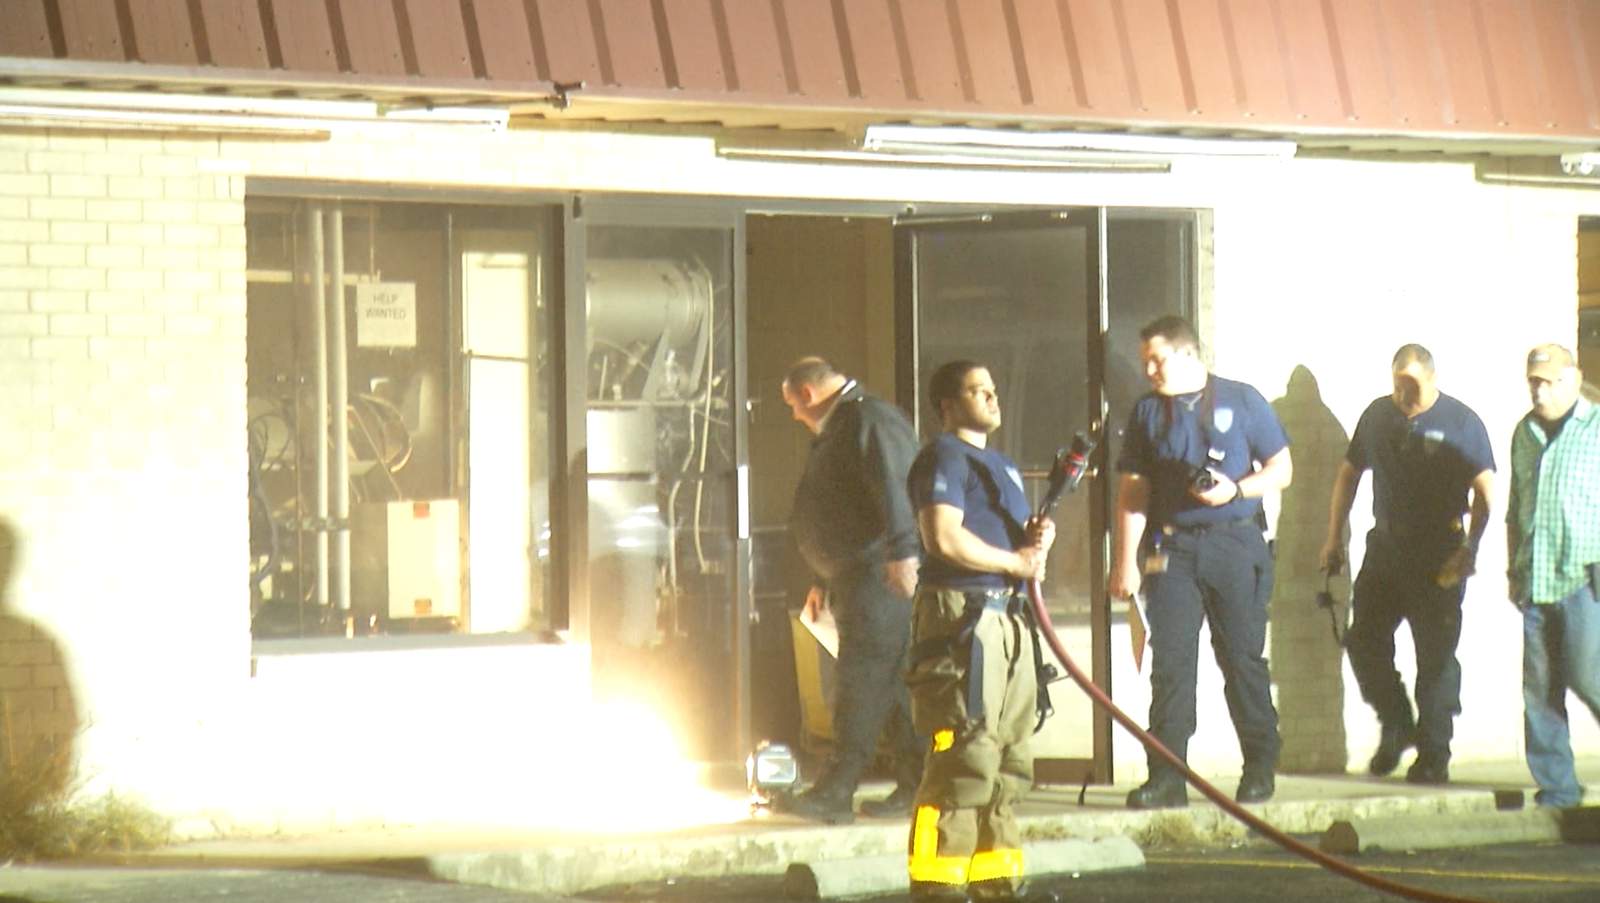 Firefighters put out ‘suspicious fire’ at dry-cleaning business in Universal City